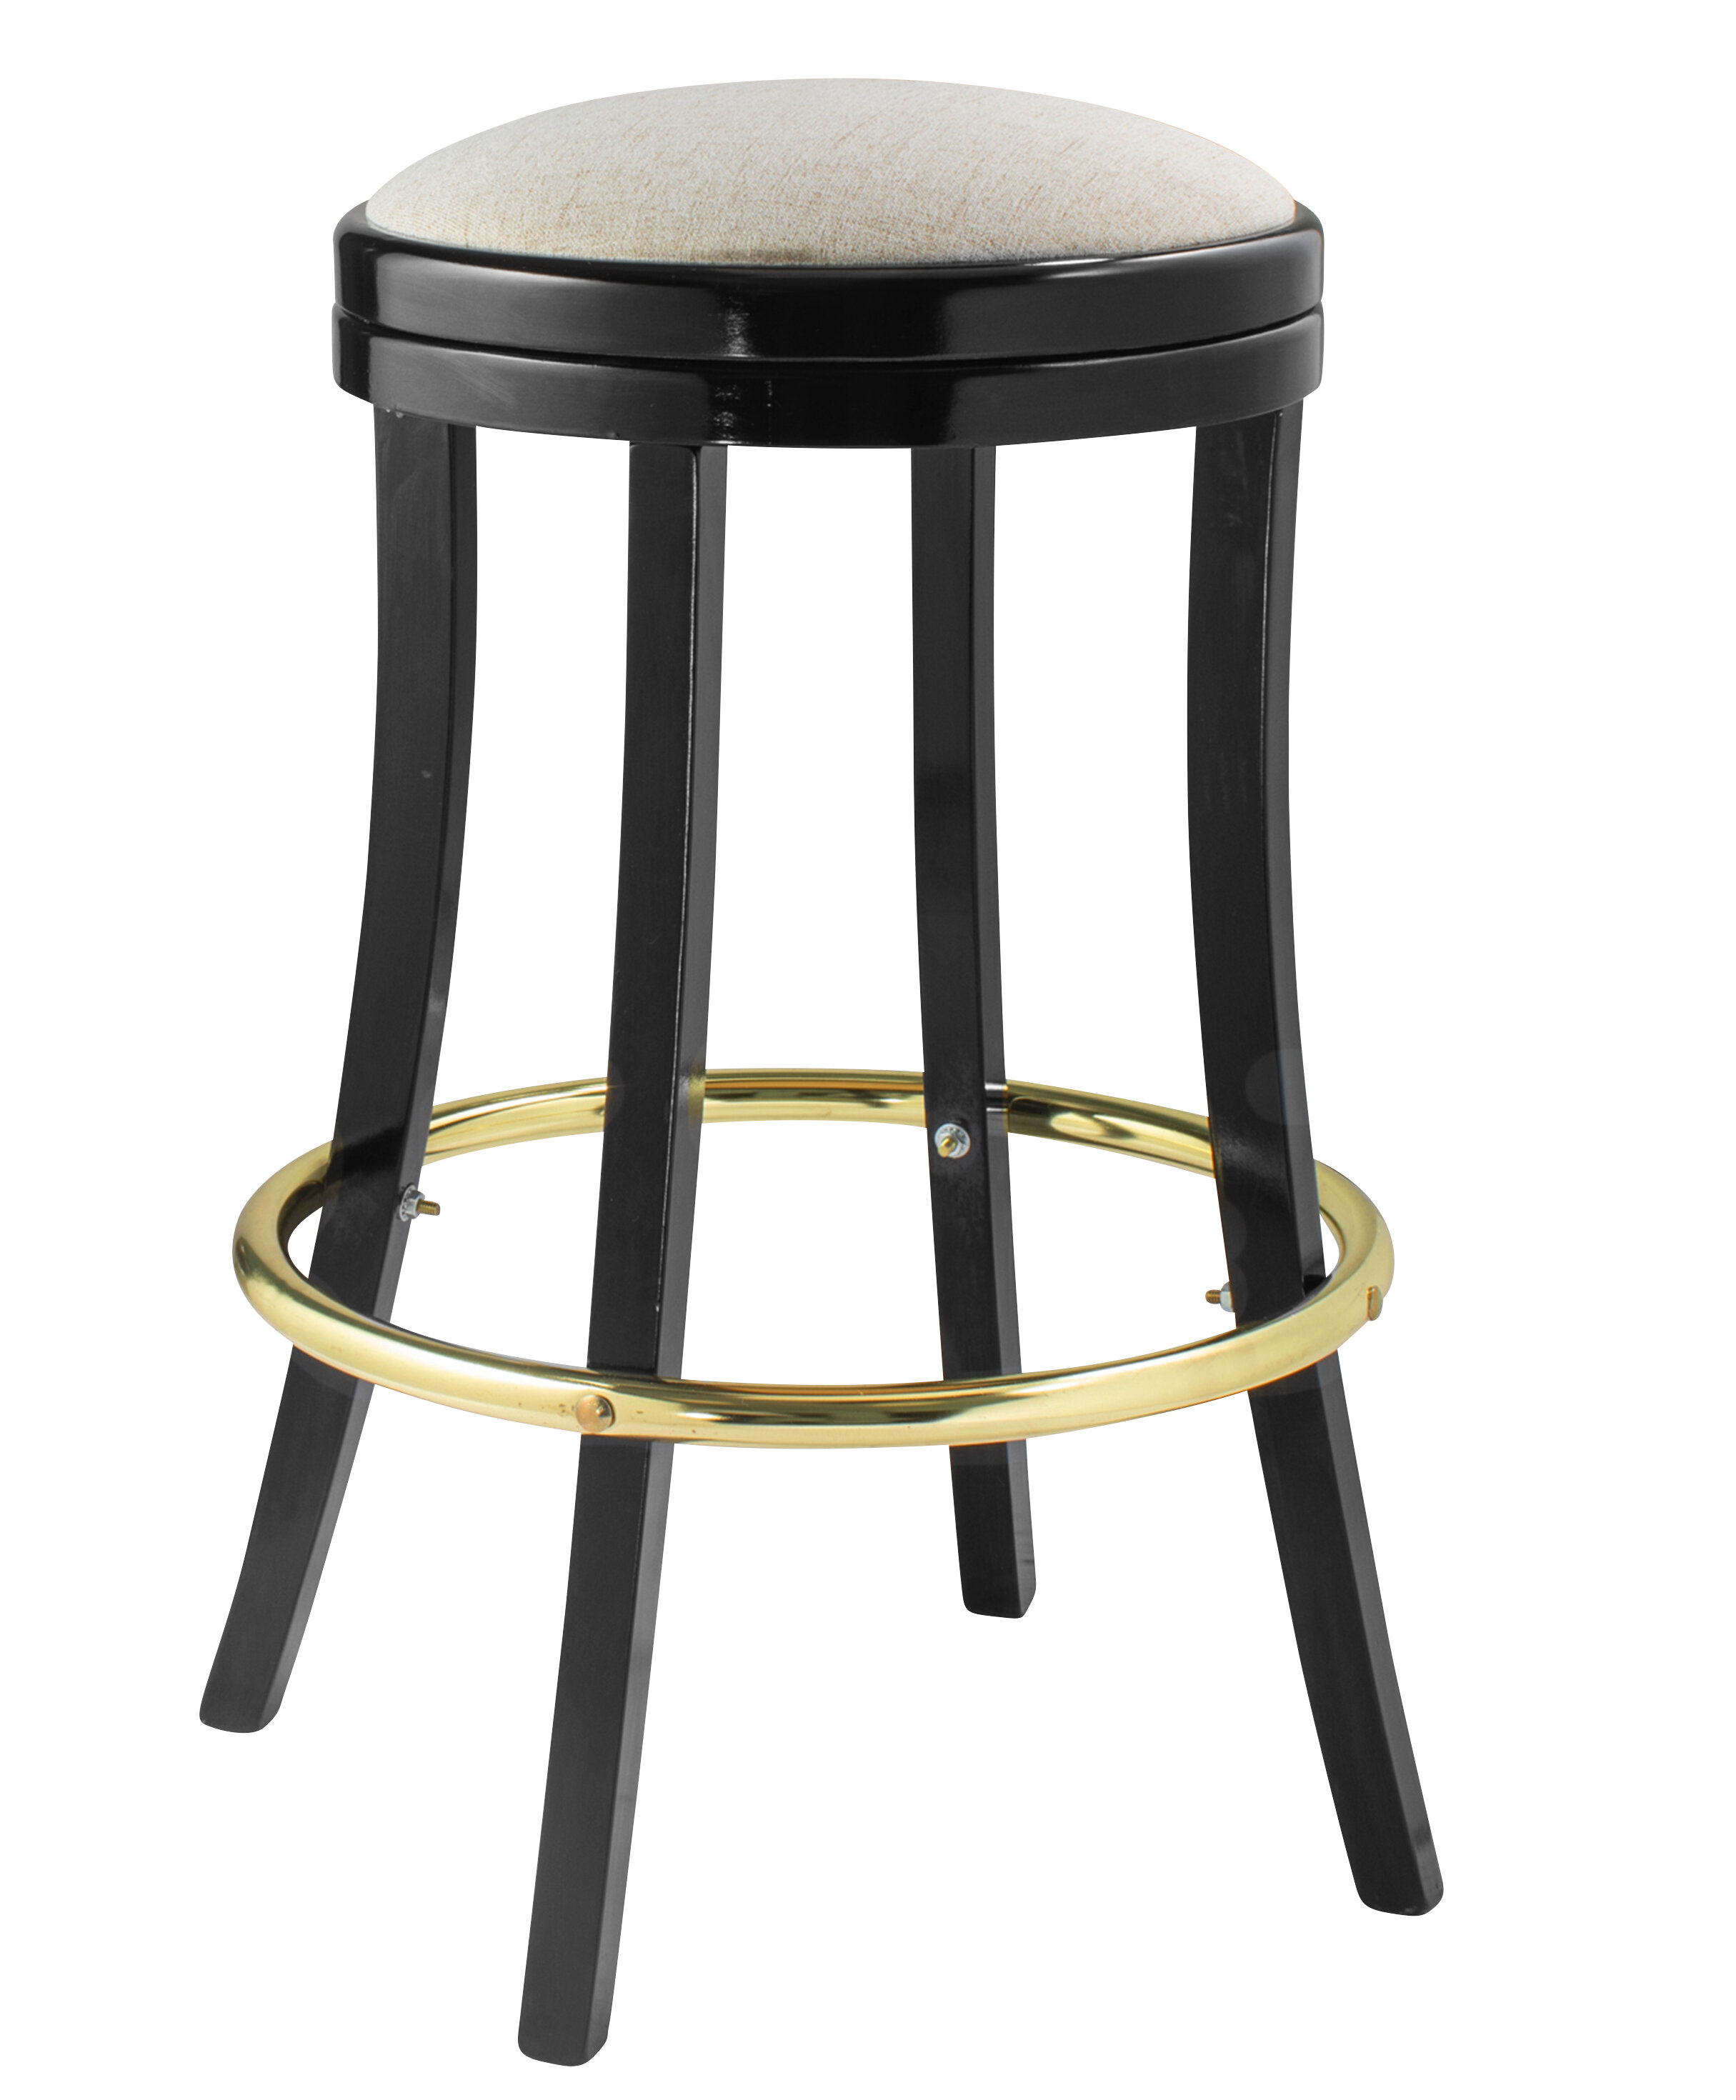 Amazing Havertys Bar Stools in the world Check it out now 